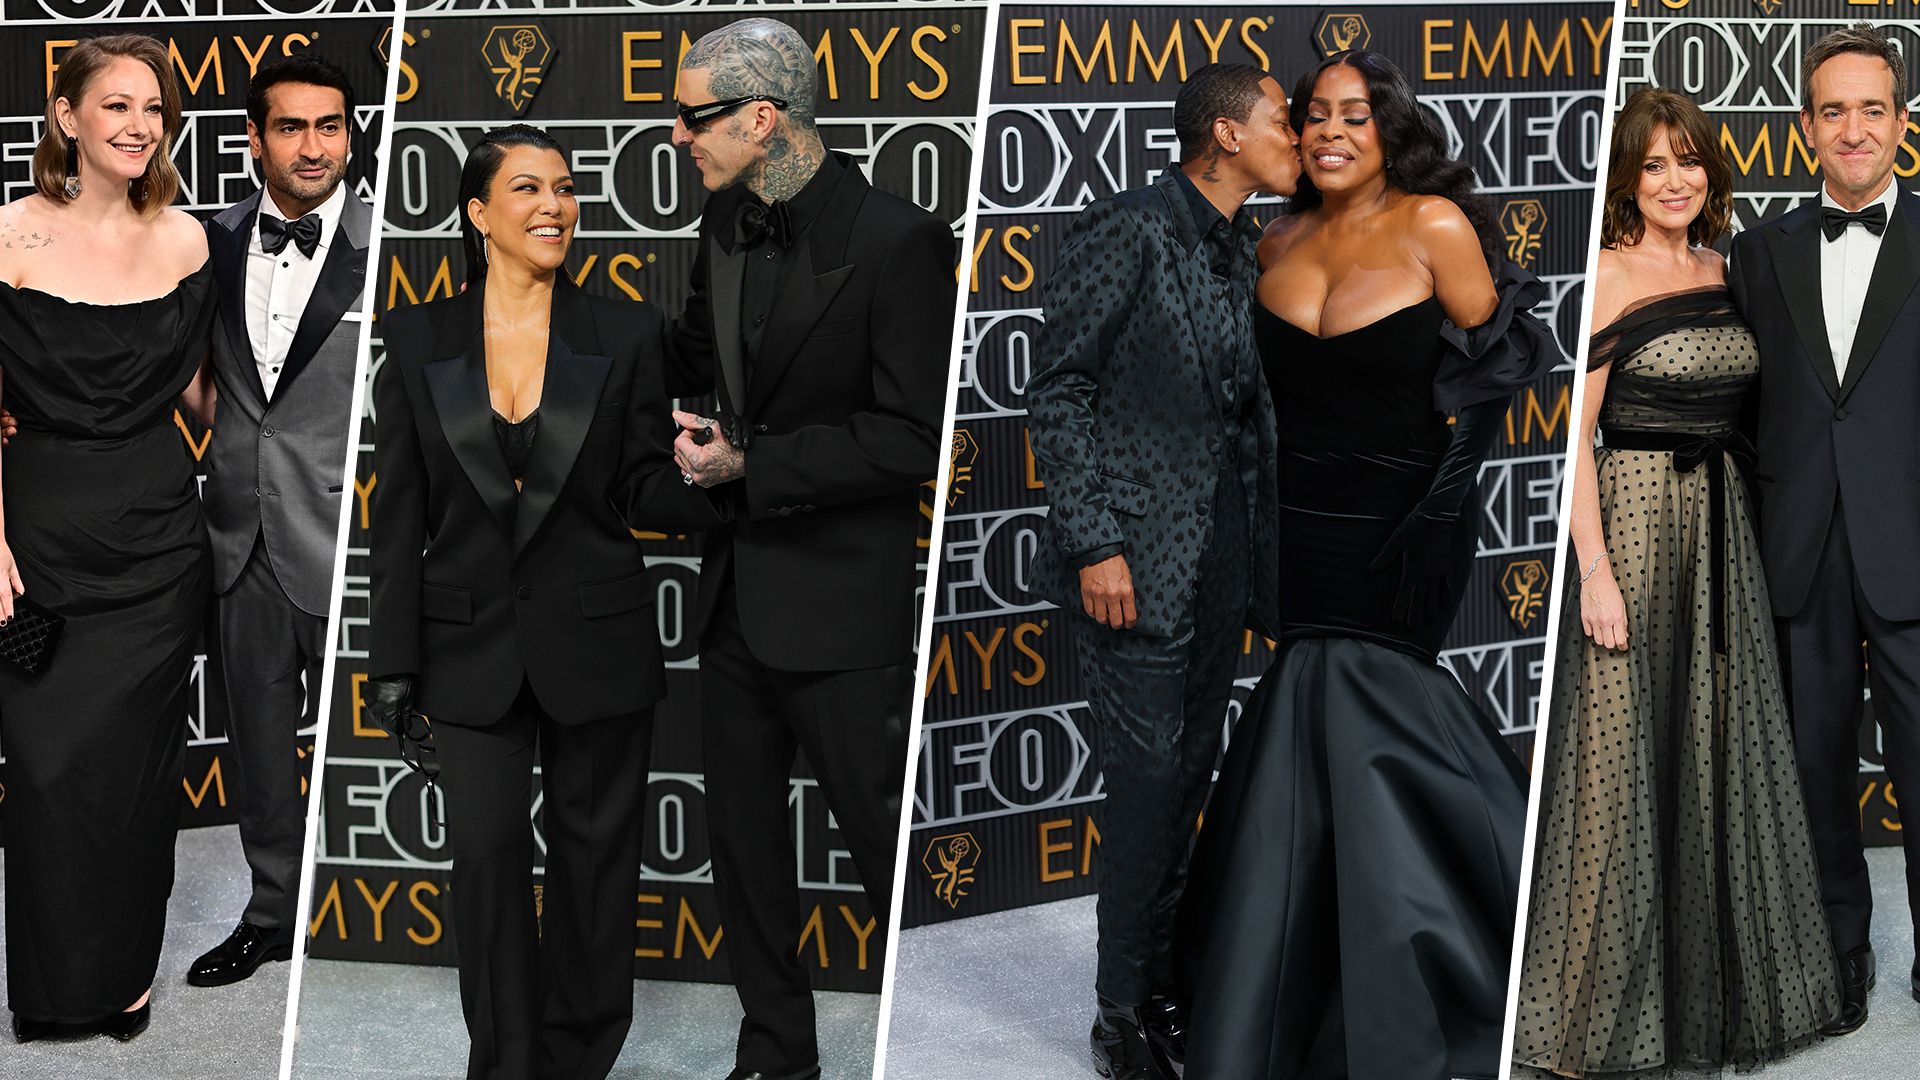 Couples at the Emmys